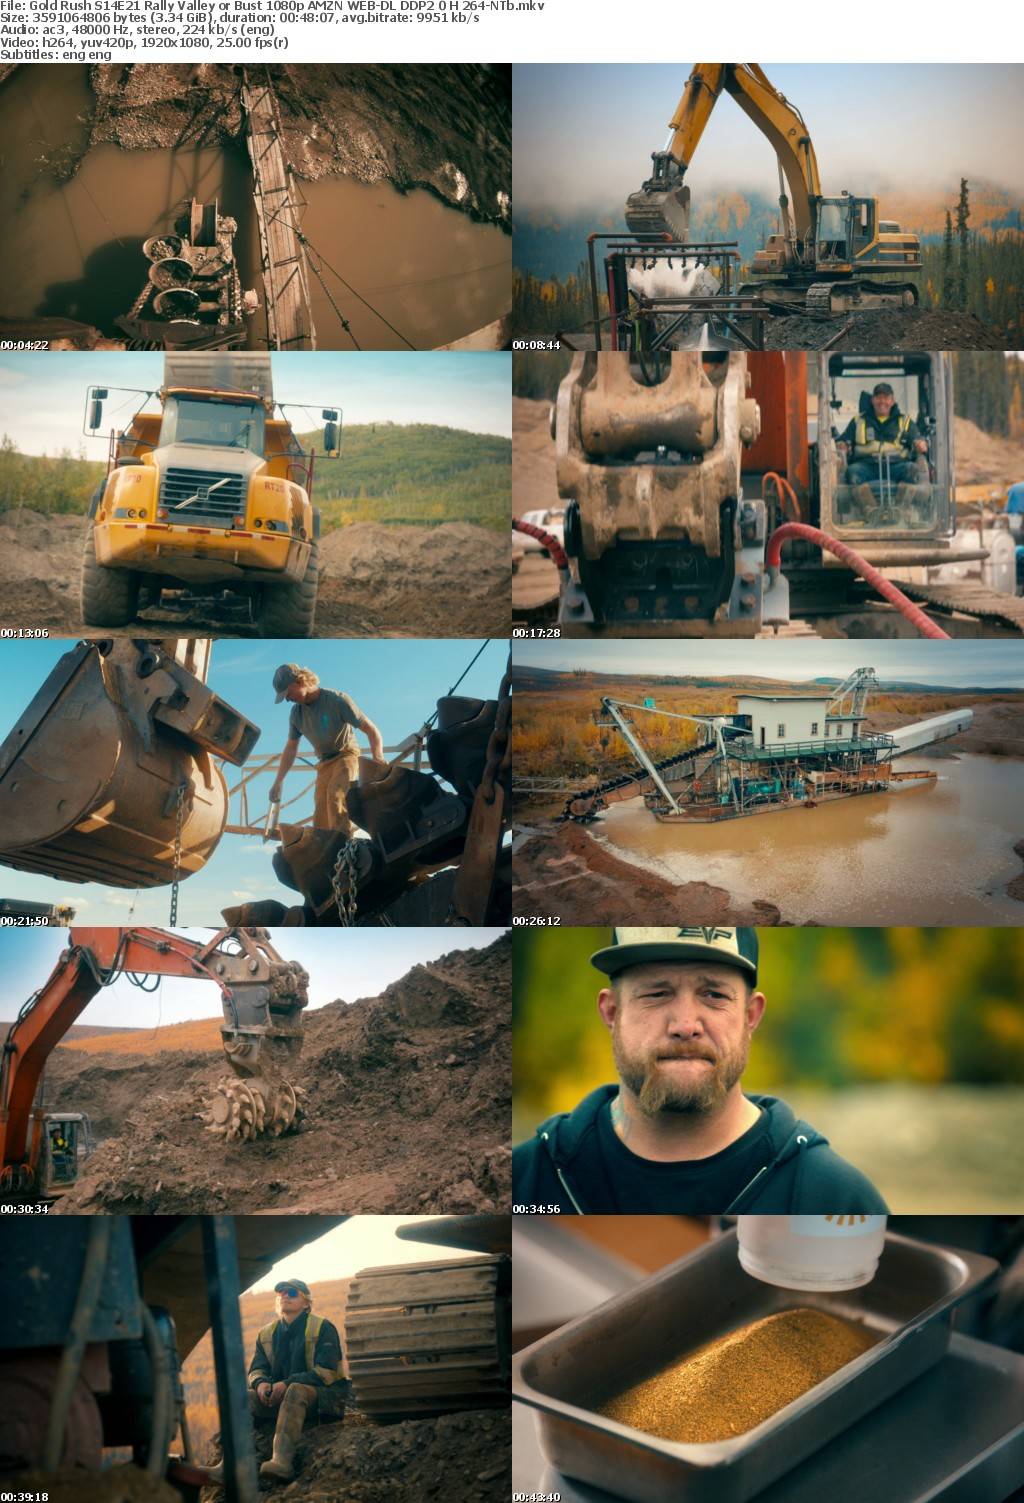 Gold Rush S14E21 Rally Valley or Bust 1080p AMZN WEB-DL DDP2 0 H 264-NTb